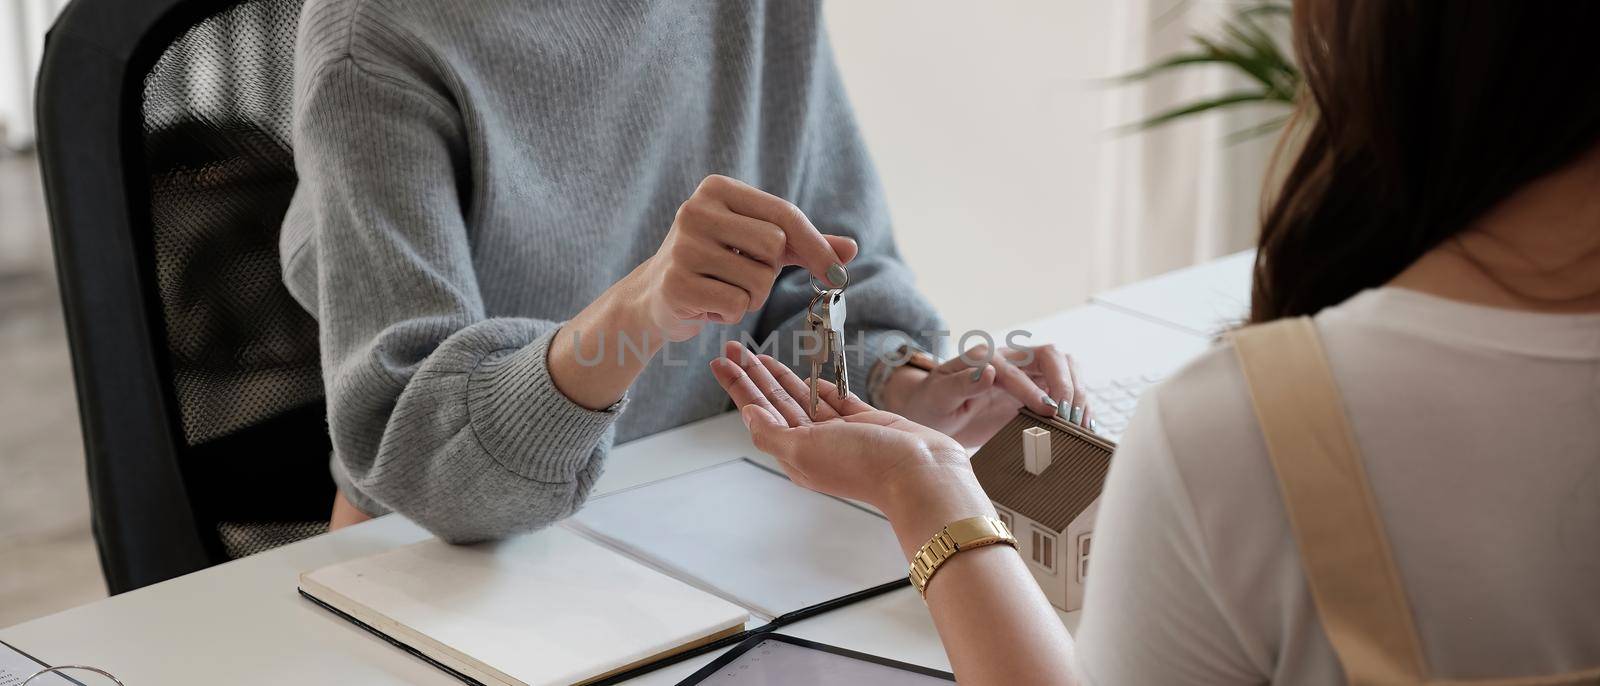 real estate agent holding house key to his client after signing contract agreement in office,concept for real estate, moving home or renting property.